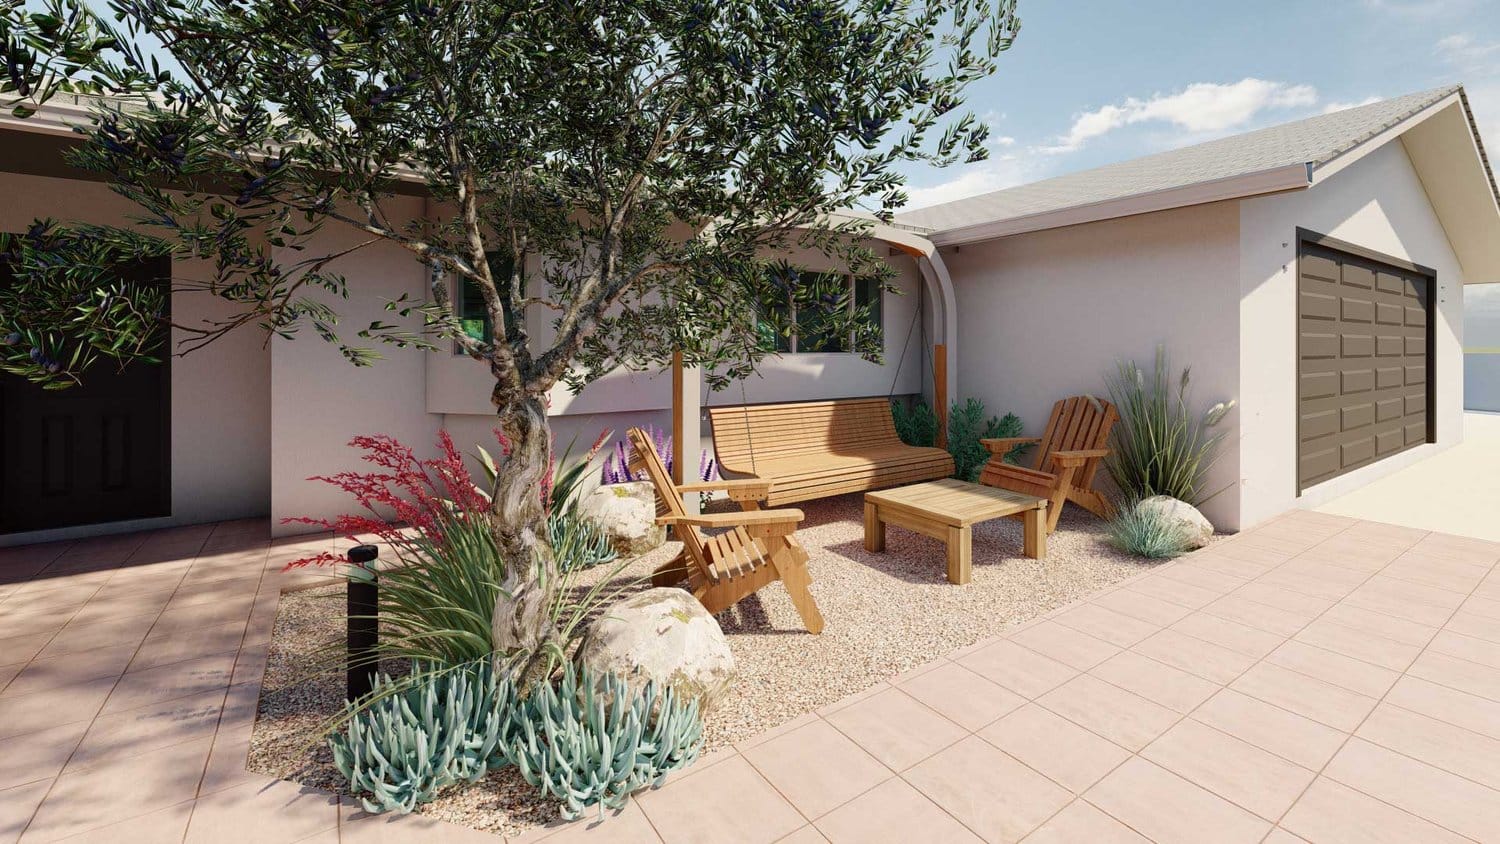 Thousand Oaks front yard gravel patio seating area with tree and plants